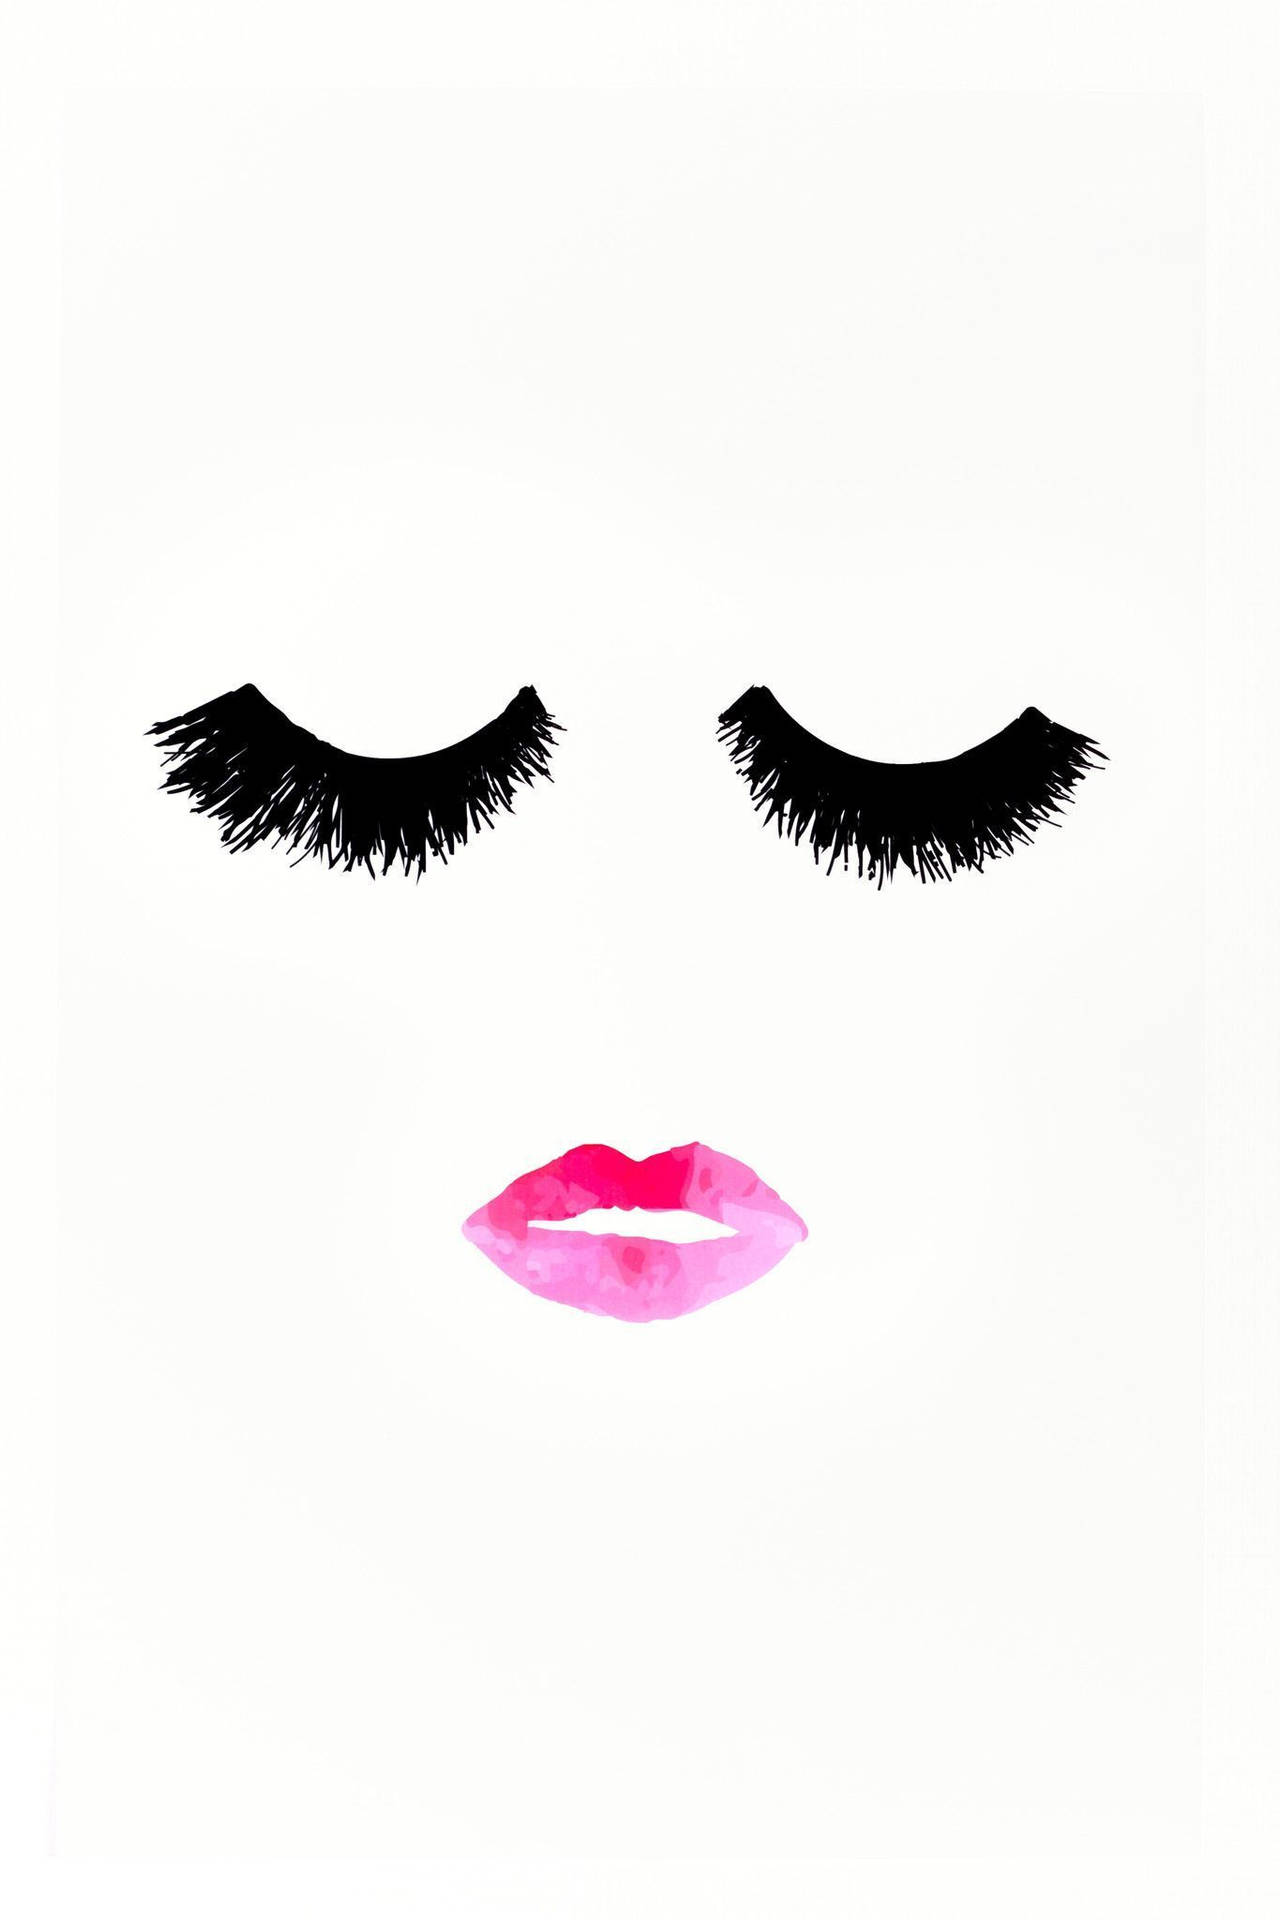 Makeup Lashes And Lipstick Art Background